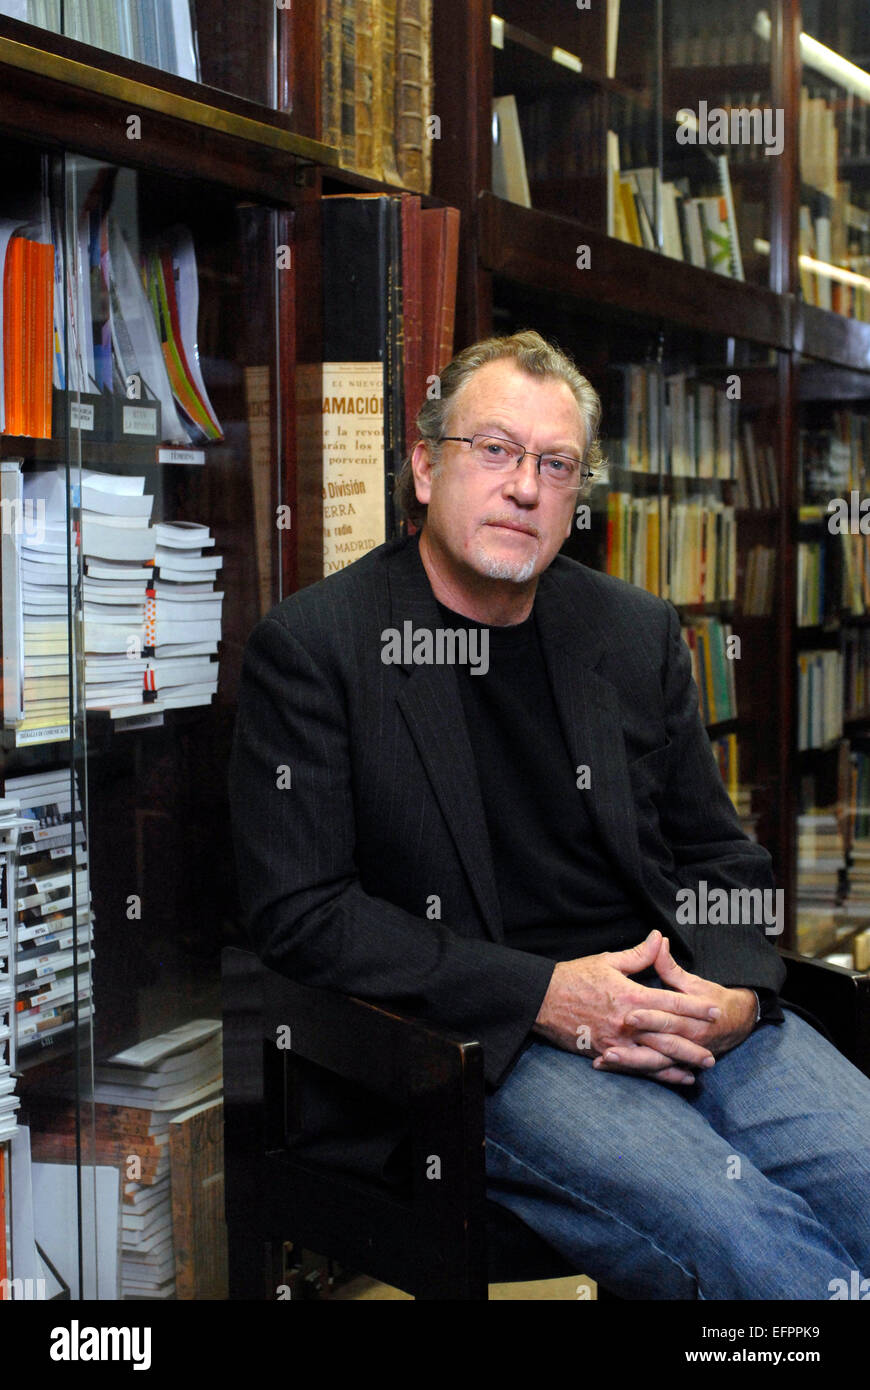 Jon Lee Anderson, Portrait of the American author, biographer and journalist, at a book shop in Barcelona. Stock Photo